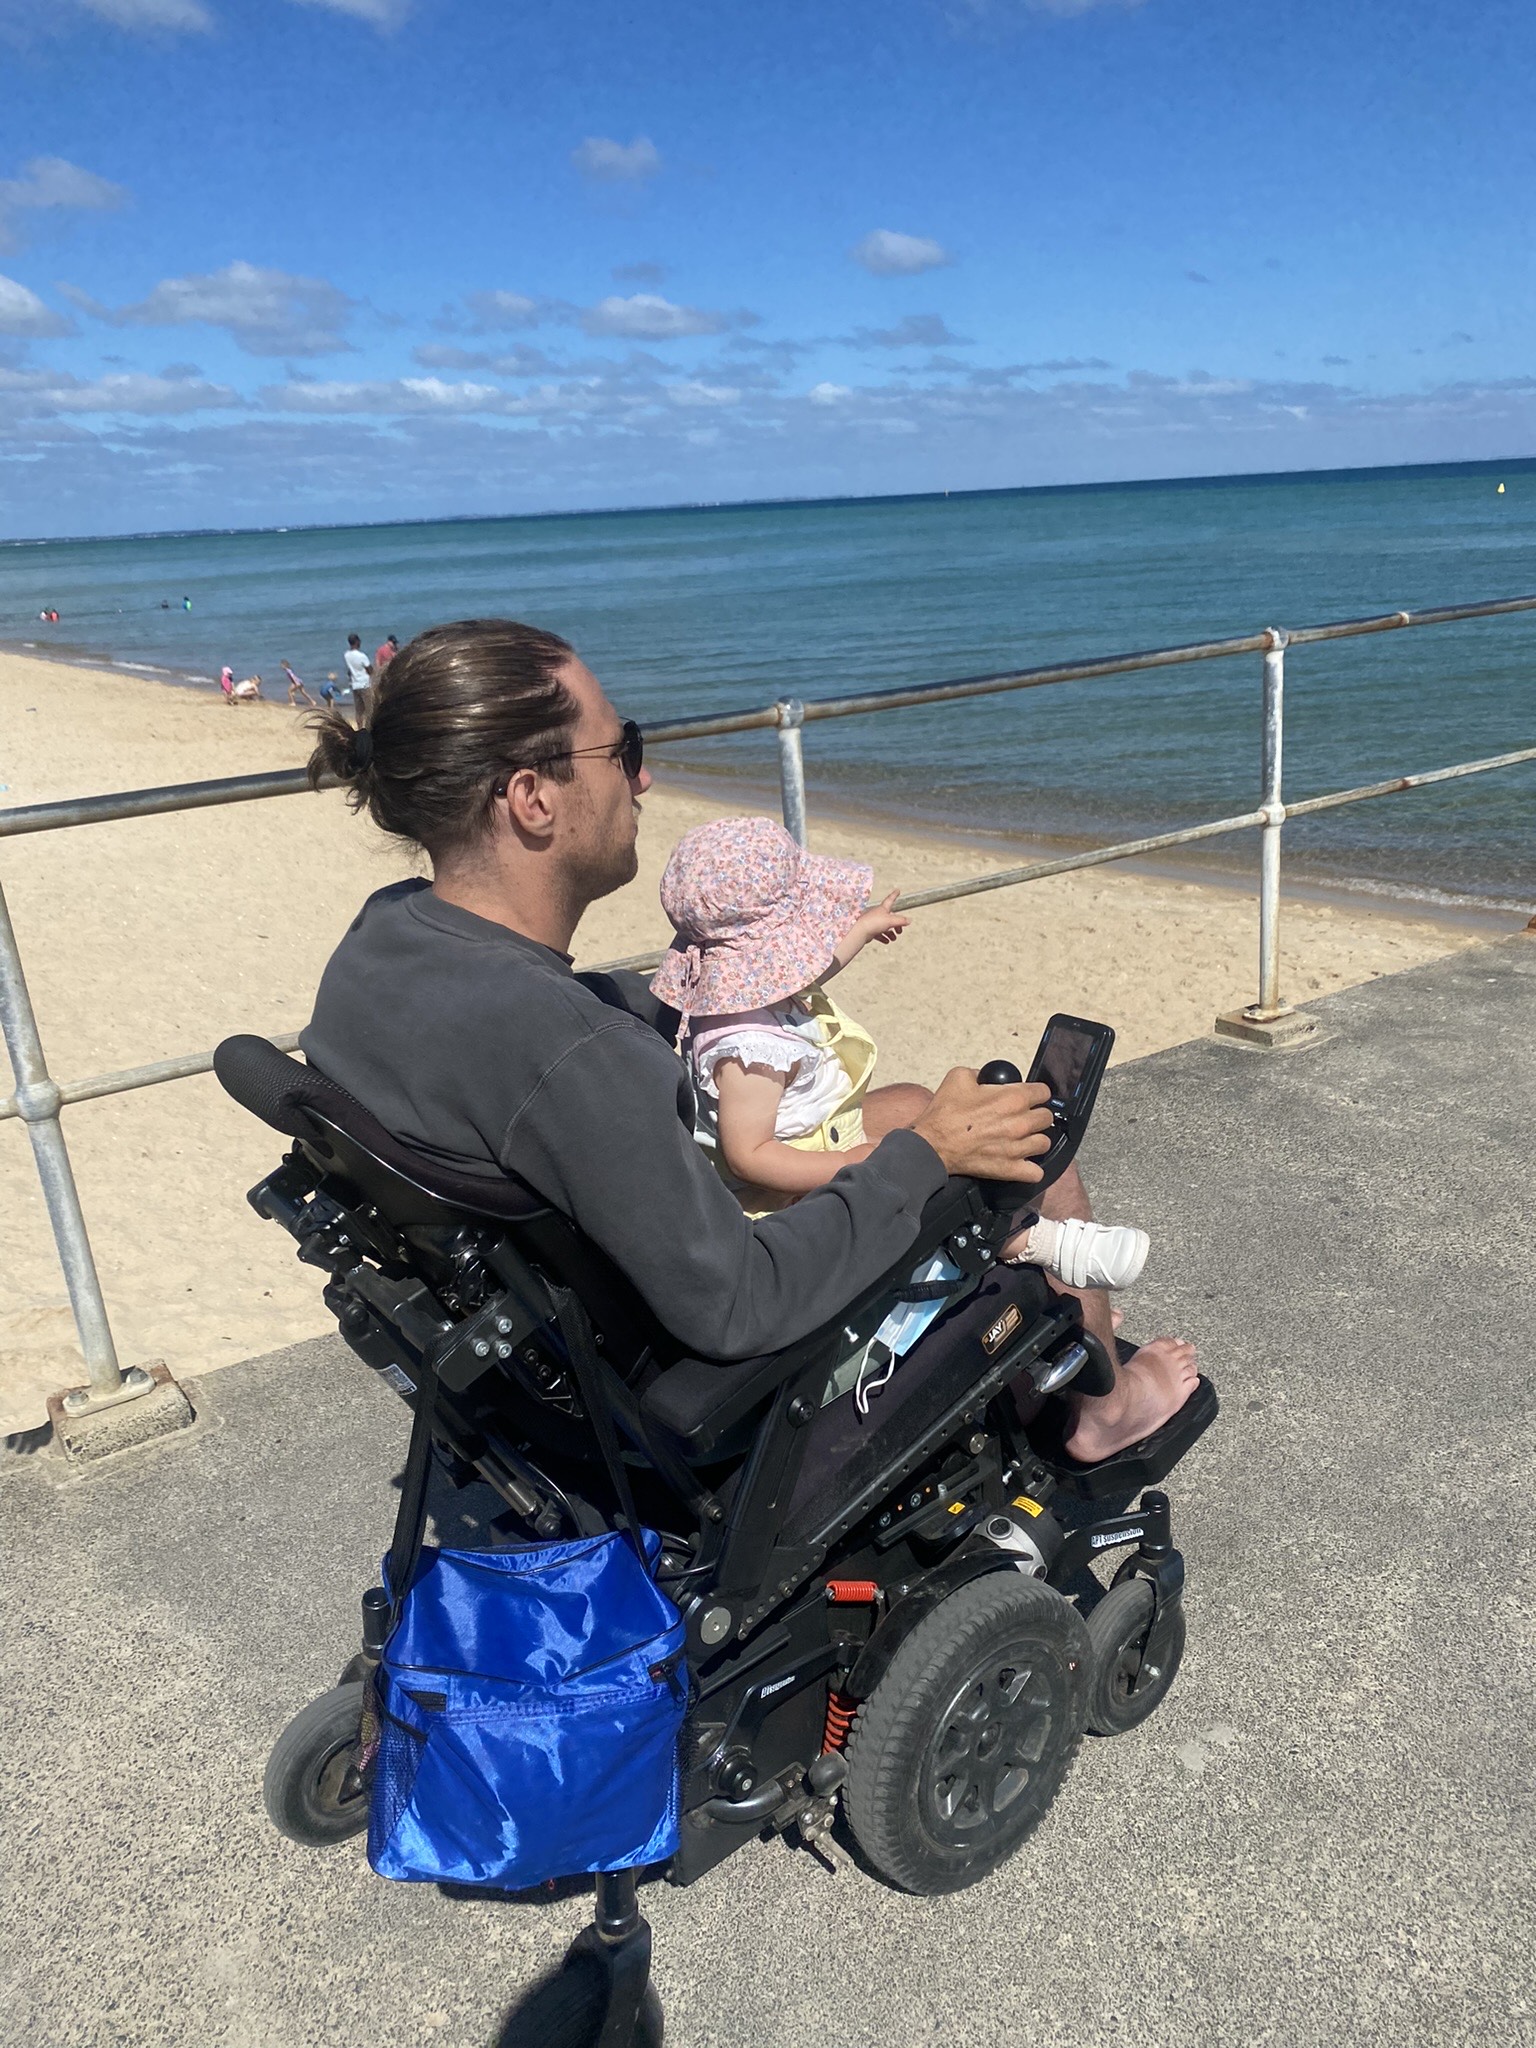 We’ve got this: Stories of Disabled Parenting 